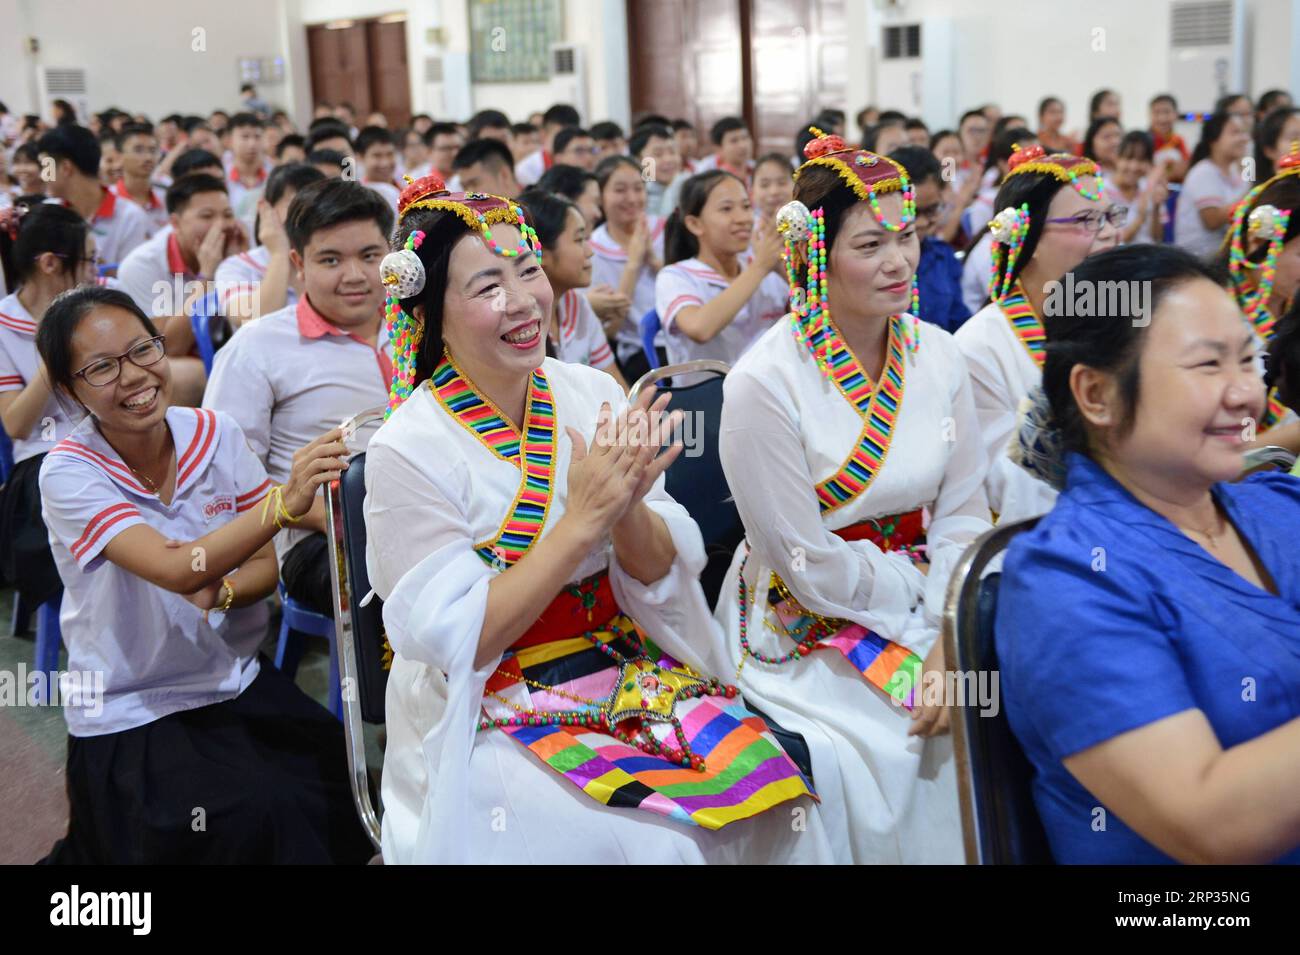 180921) -- VIENTIANE, Sept. 21, 2018 -- Teachers and students from Lieutou Chinese School watch performances in Vientiane, Laos, on Sept